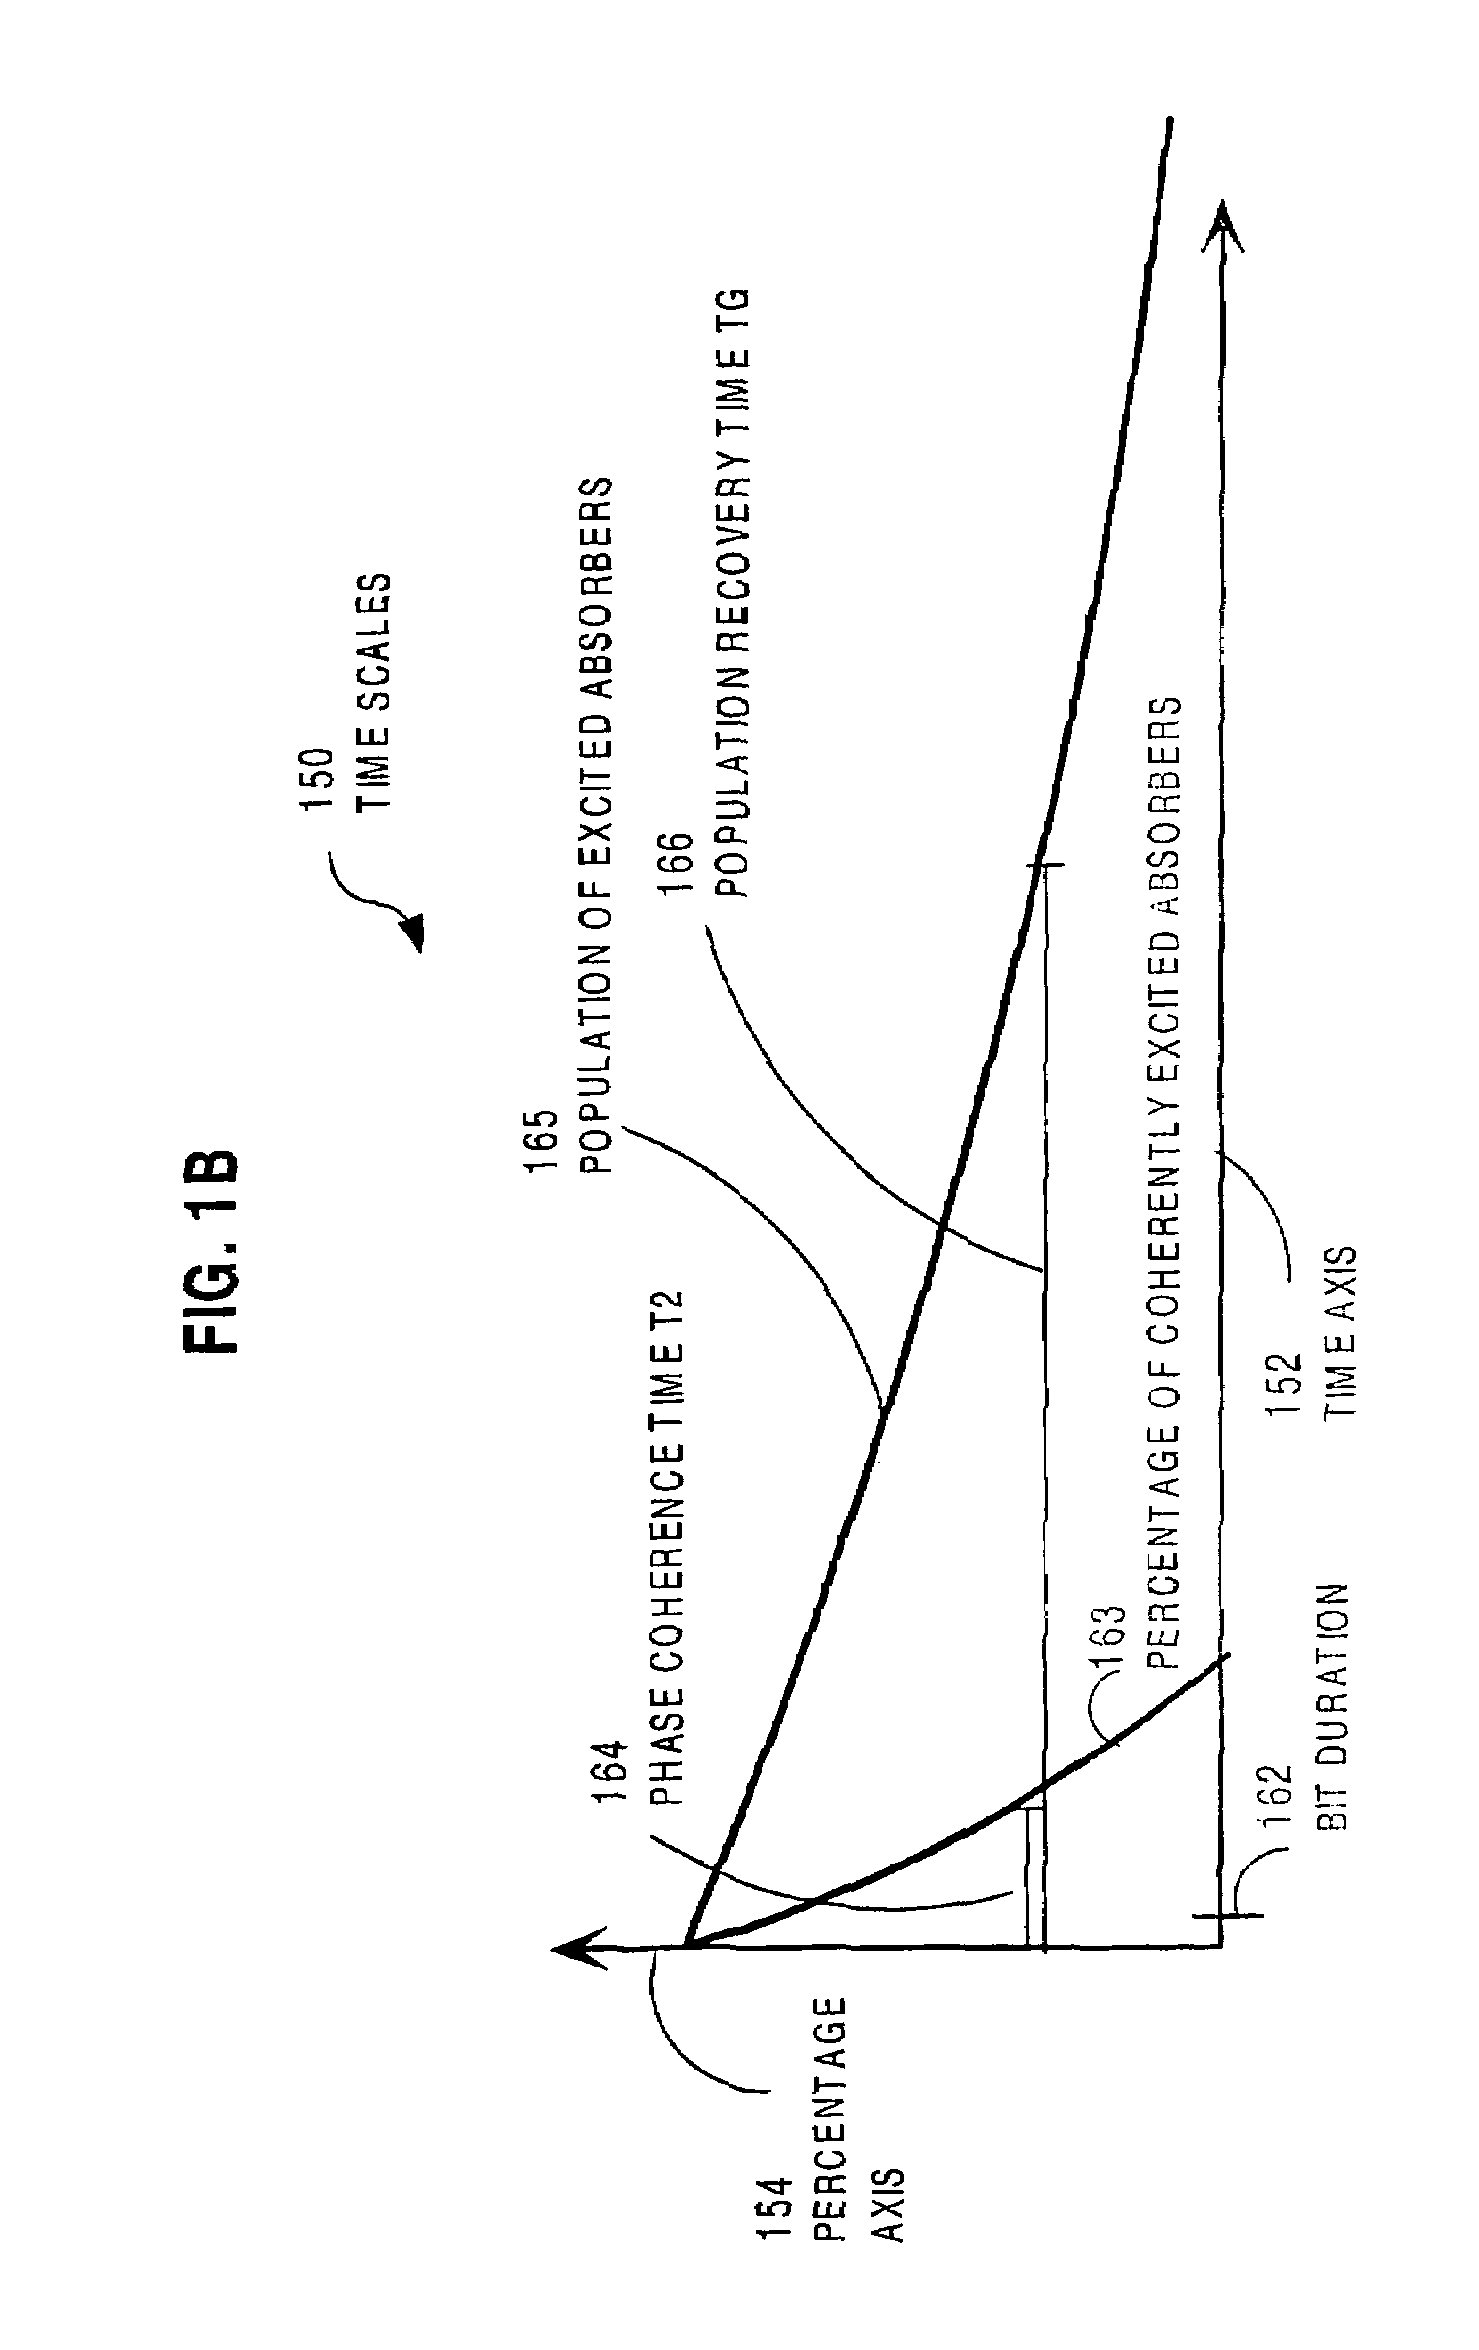 Method and apparatus for processing high time-bandwidth signals using a material with inhomogeneously broadened absorption spectrum